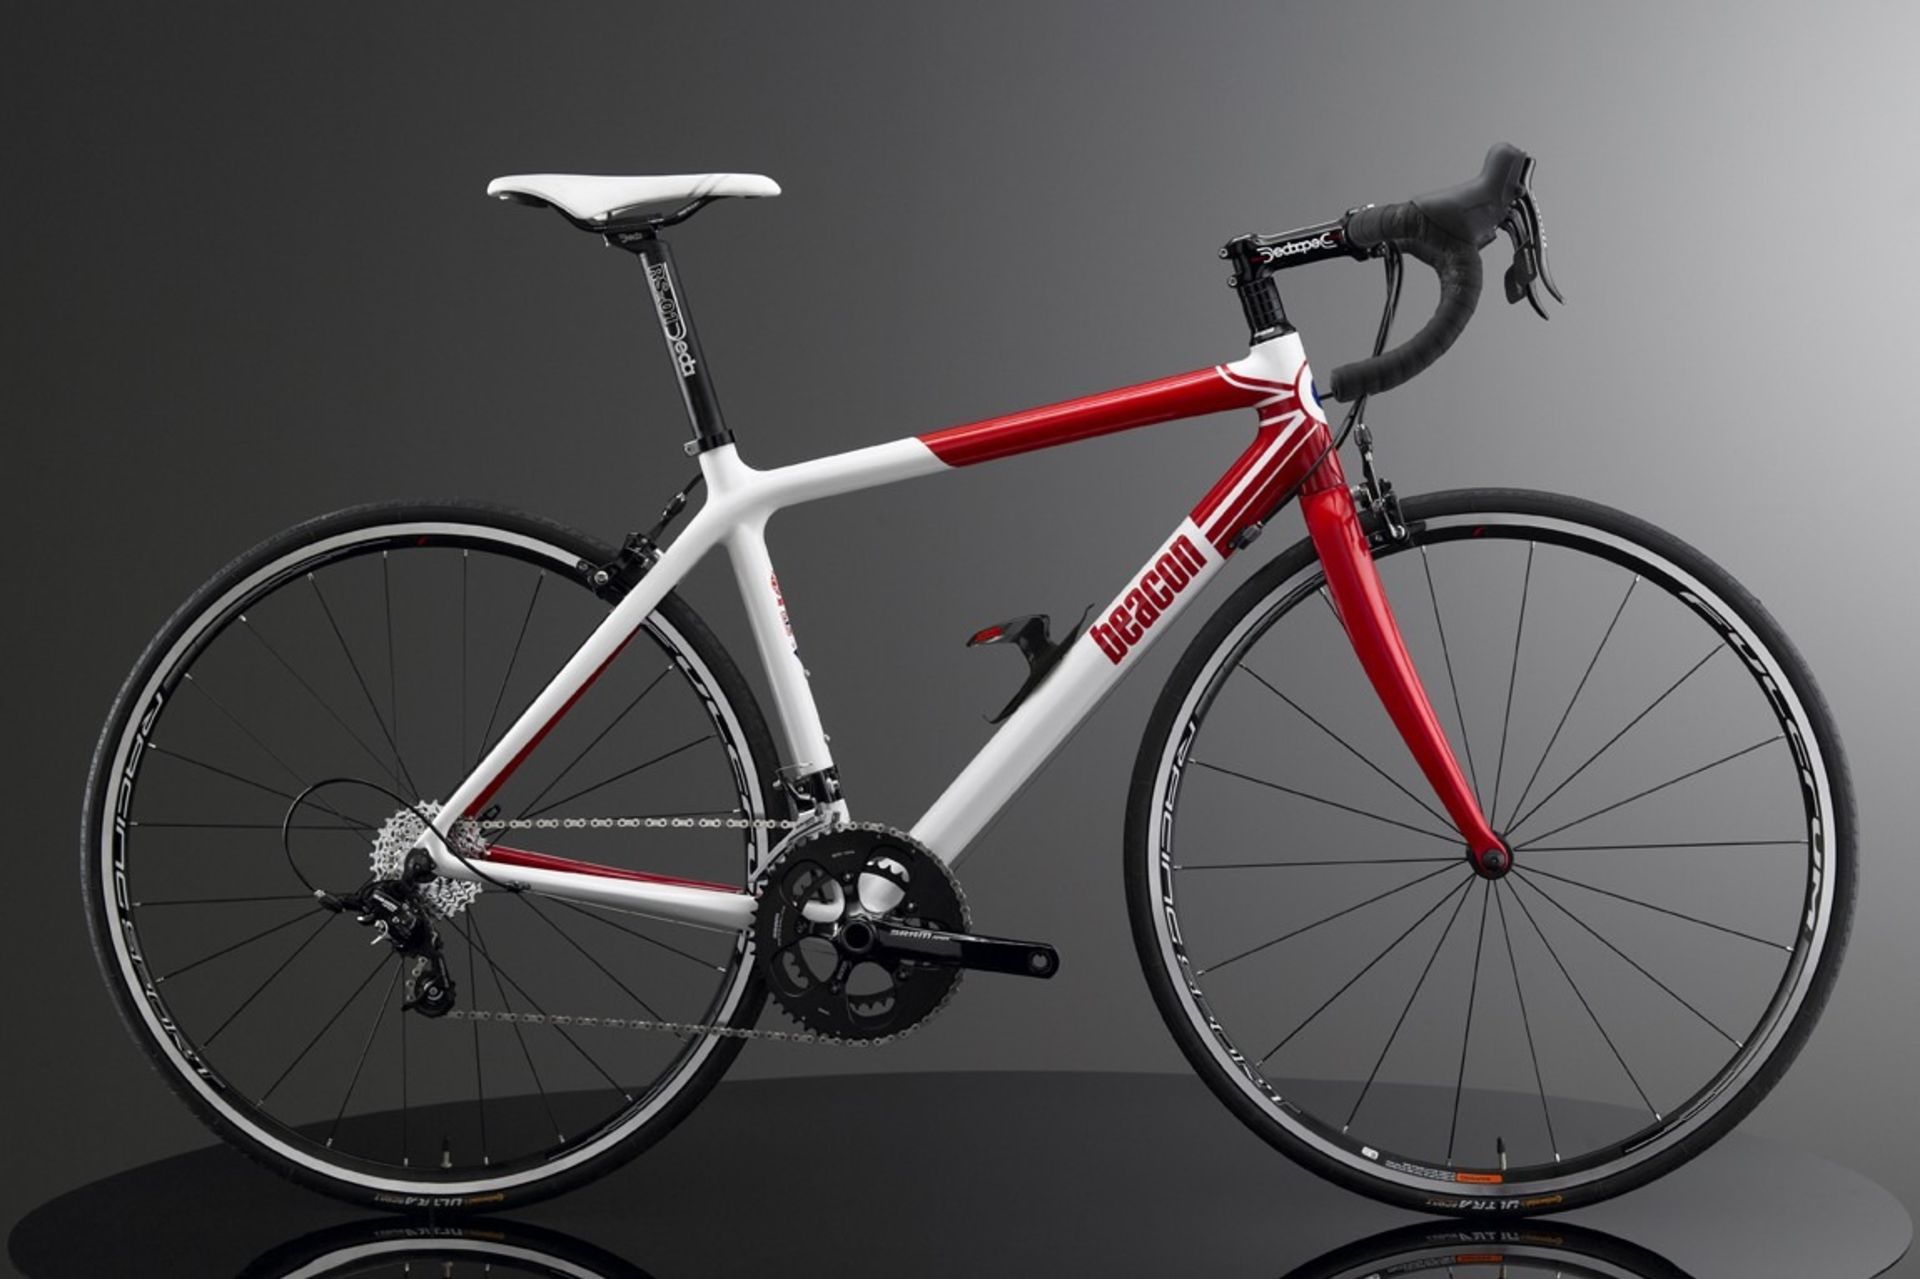 1 x Beacon Model BF-60, Size 480, Carbon Fibre Bike Frame in White & Red . - Image 2 of 3